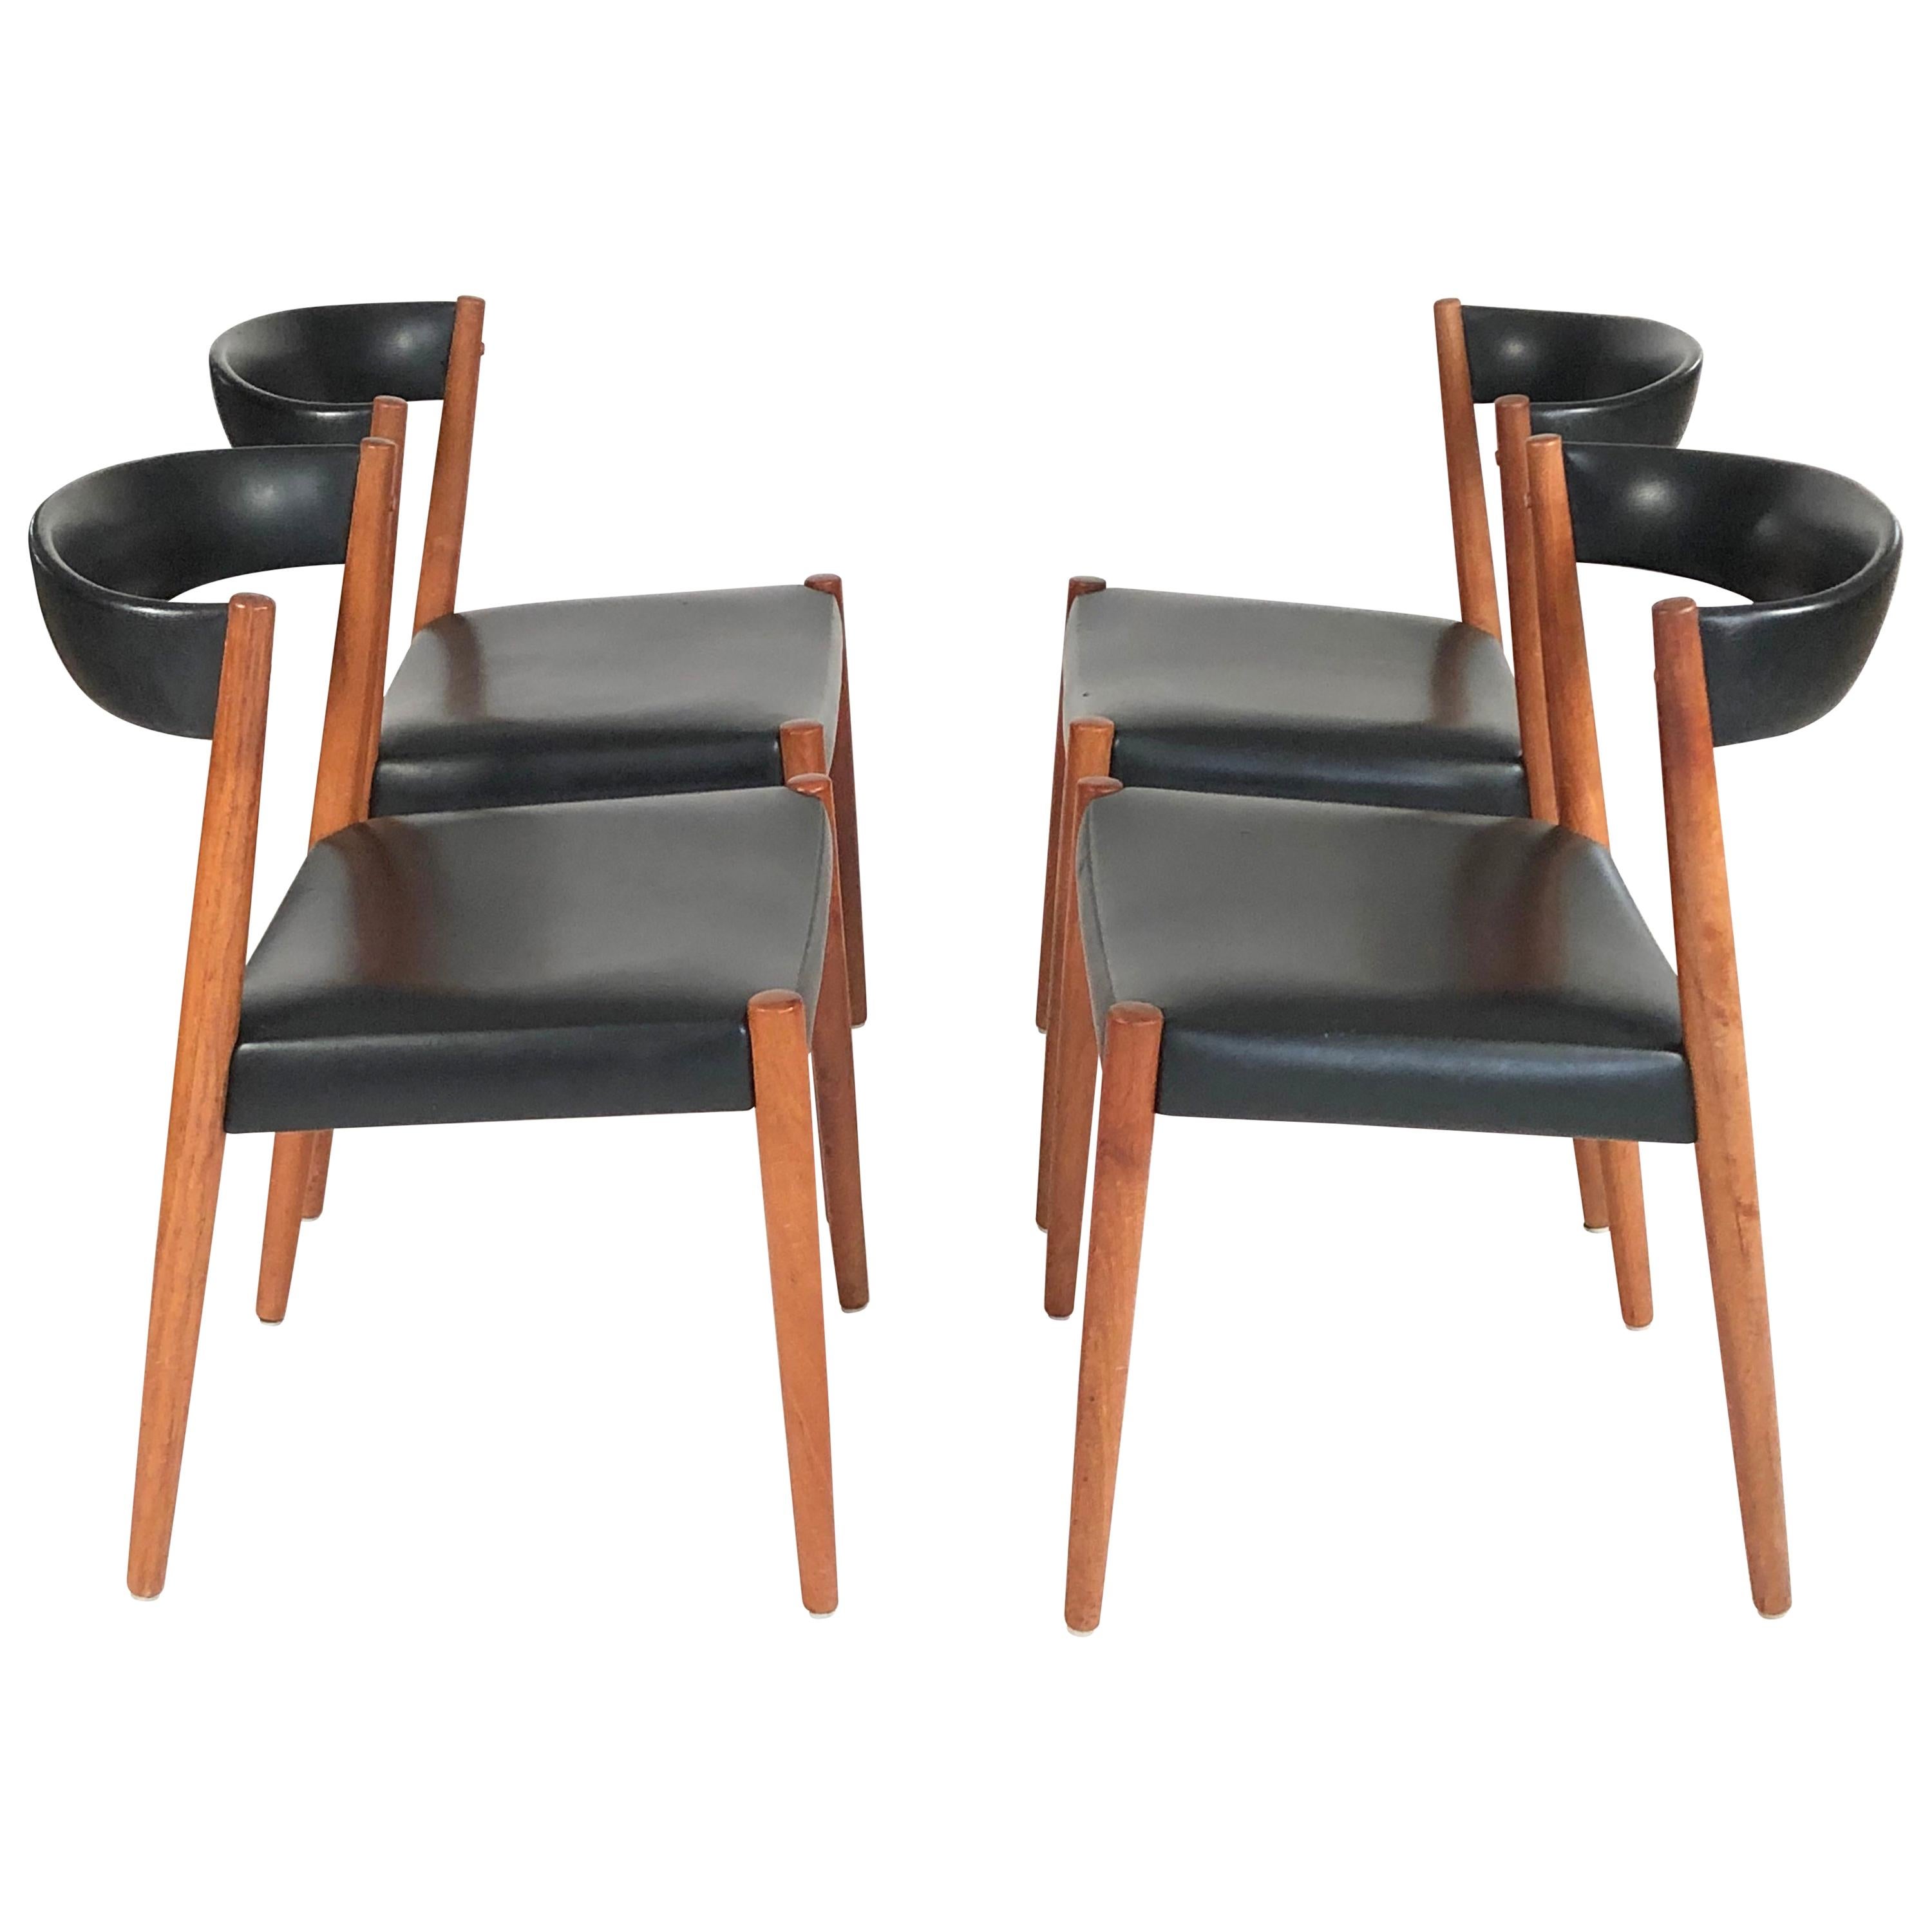 Set of 4 Danish Teak and Leather Mid-Century Modern Dining Chairs